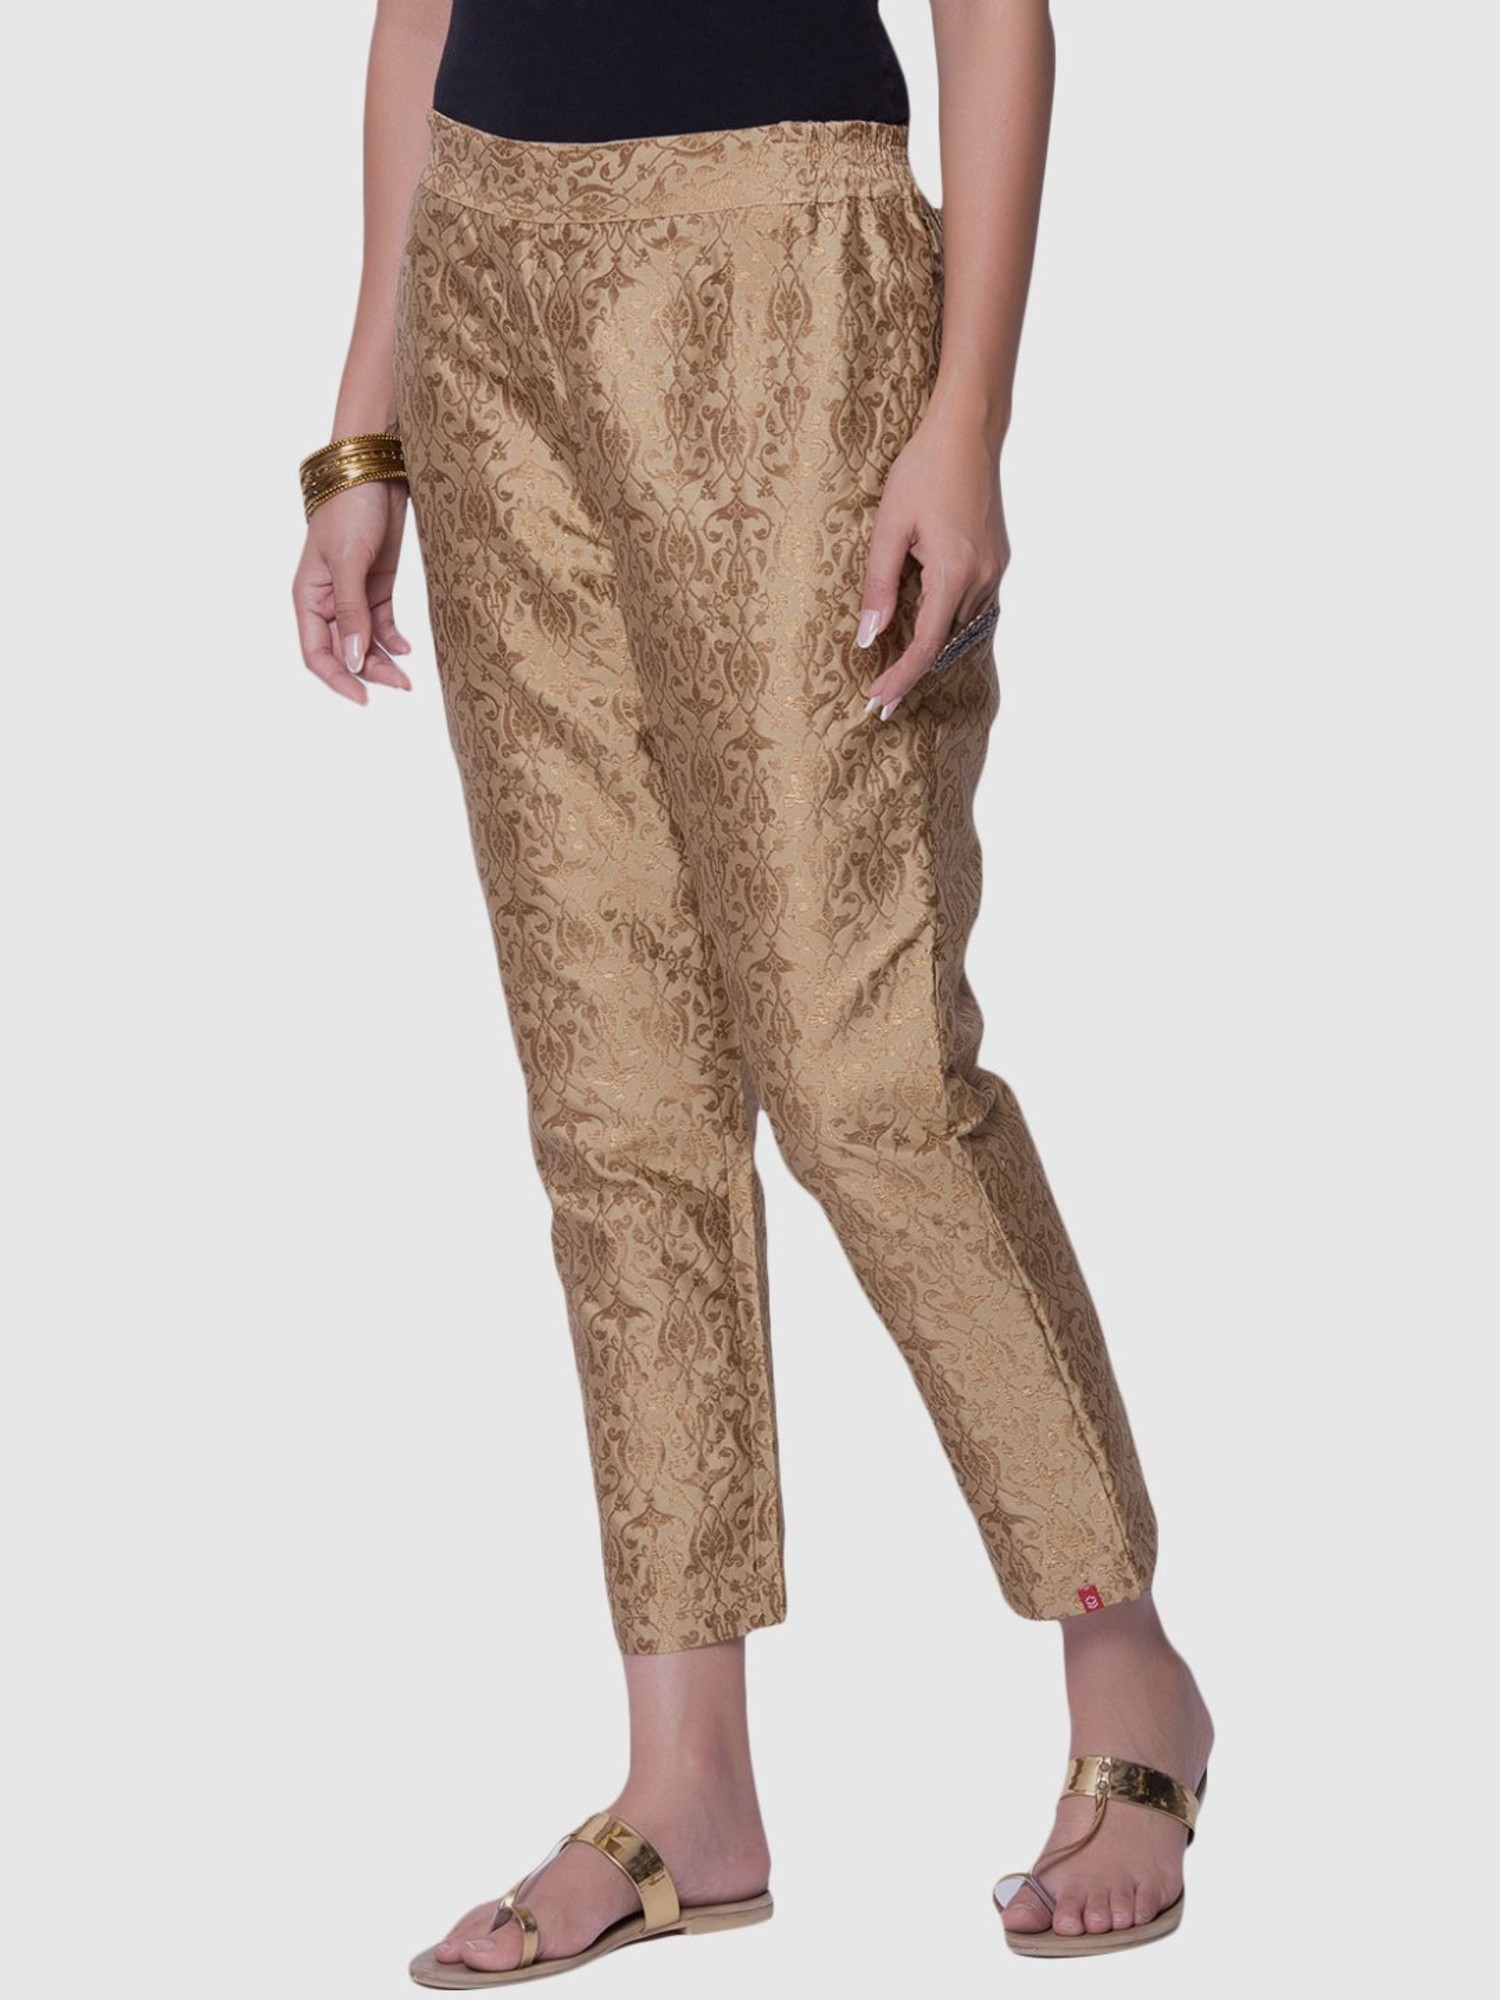 Buy Online Beige Rayon Pants for Women  Girls at Best Prices in Biba  IndiaFLORALH15377AW19BEG